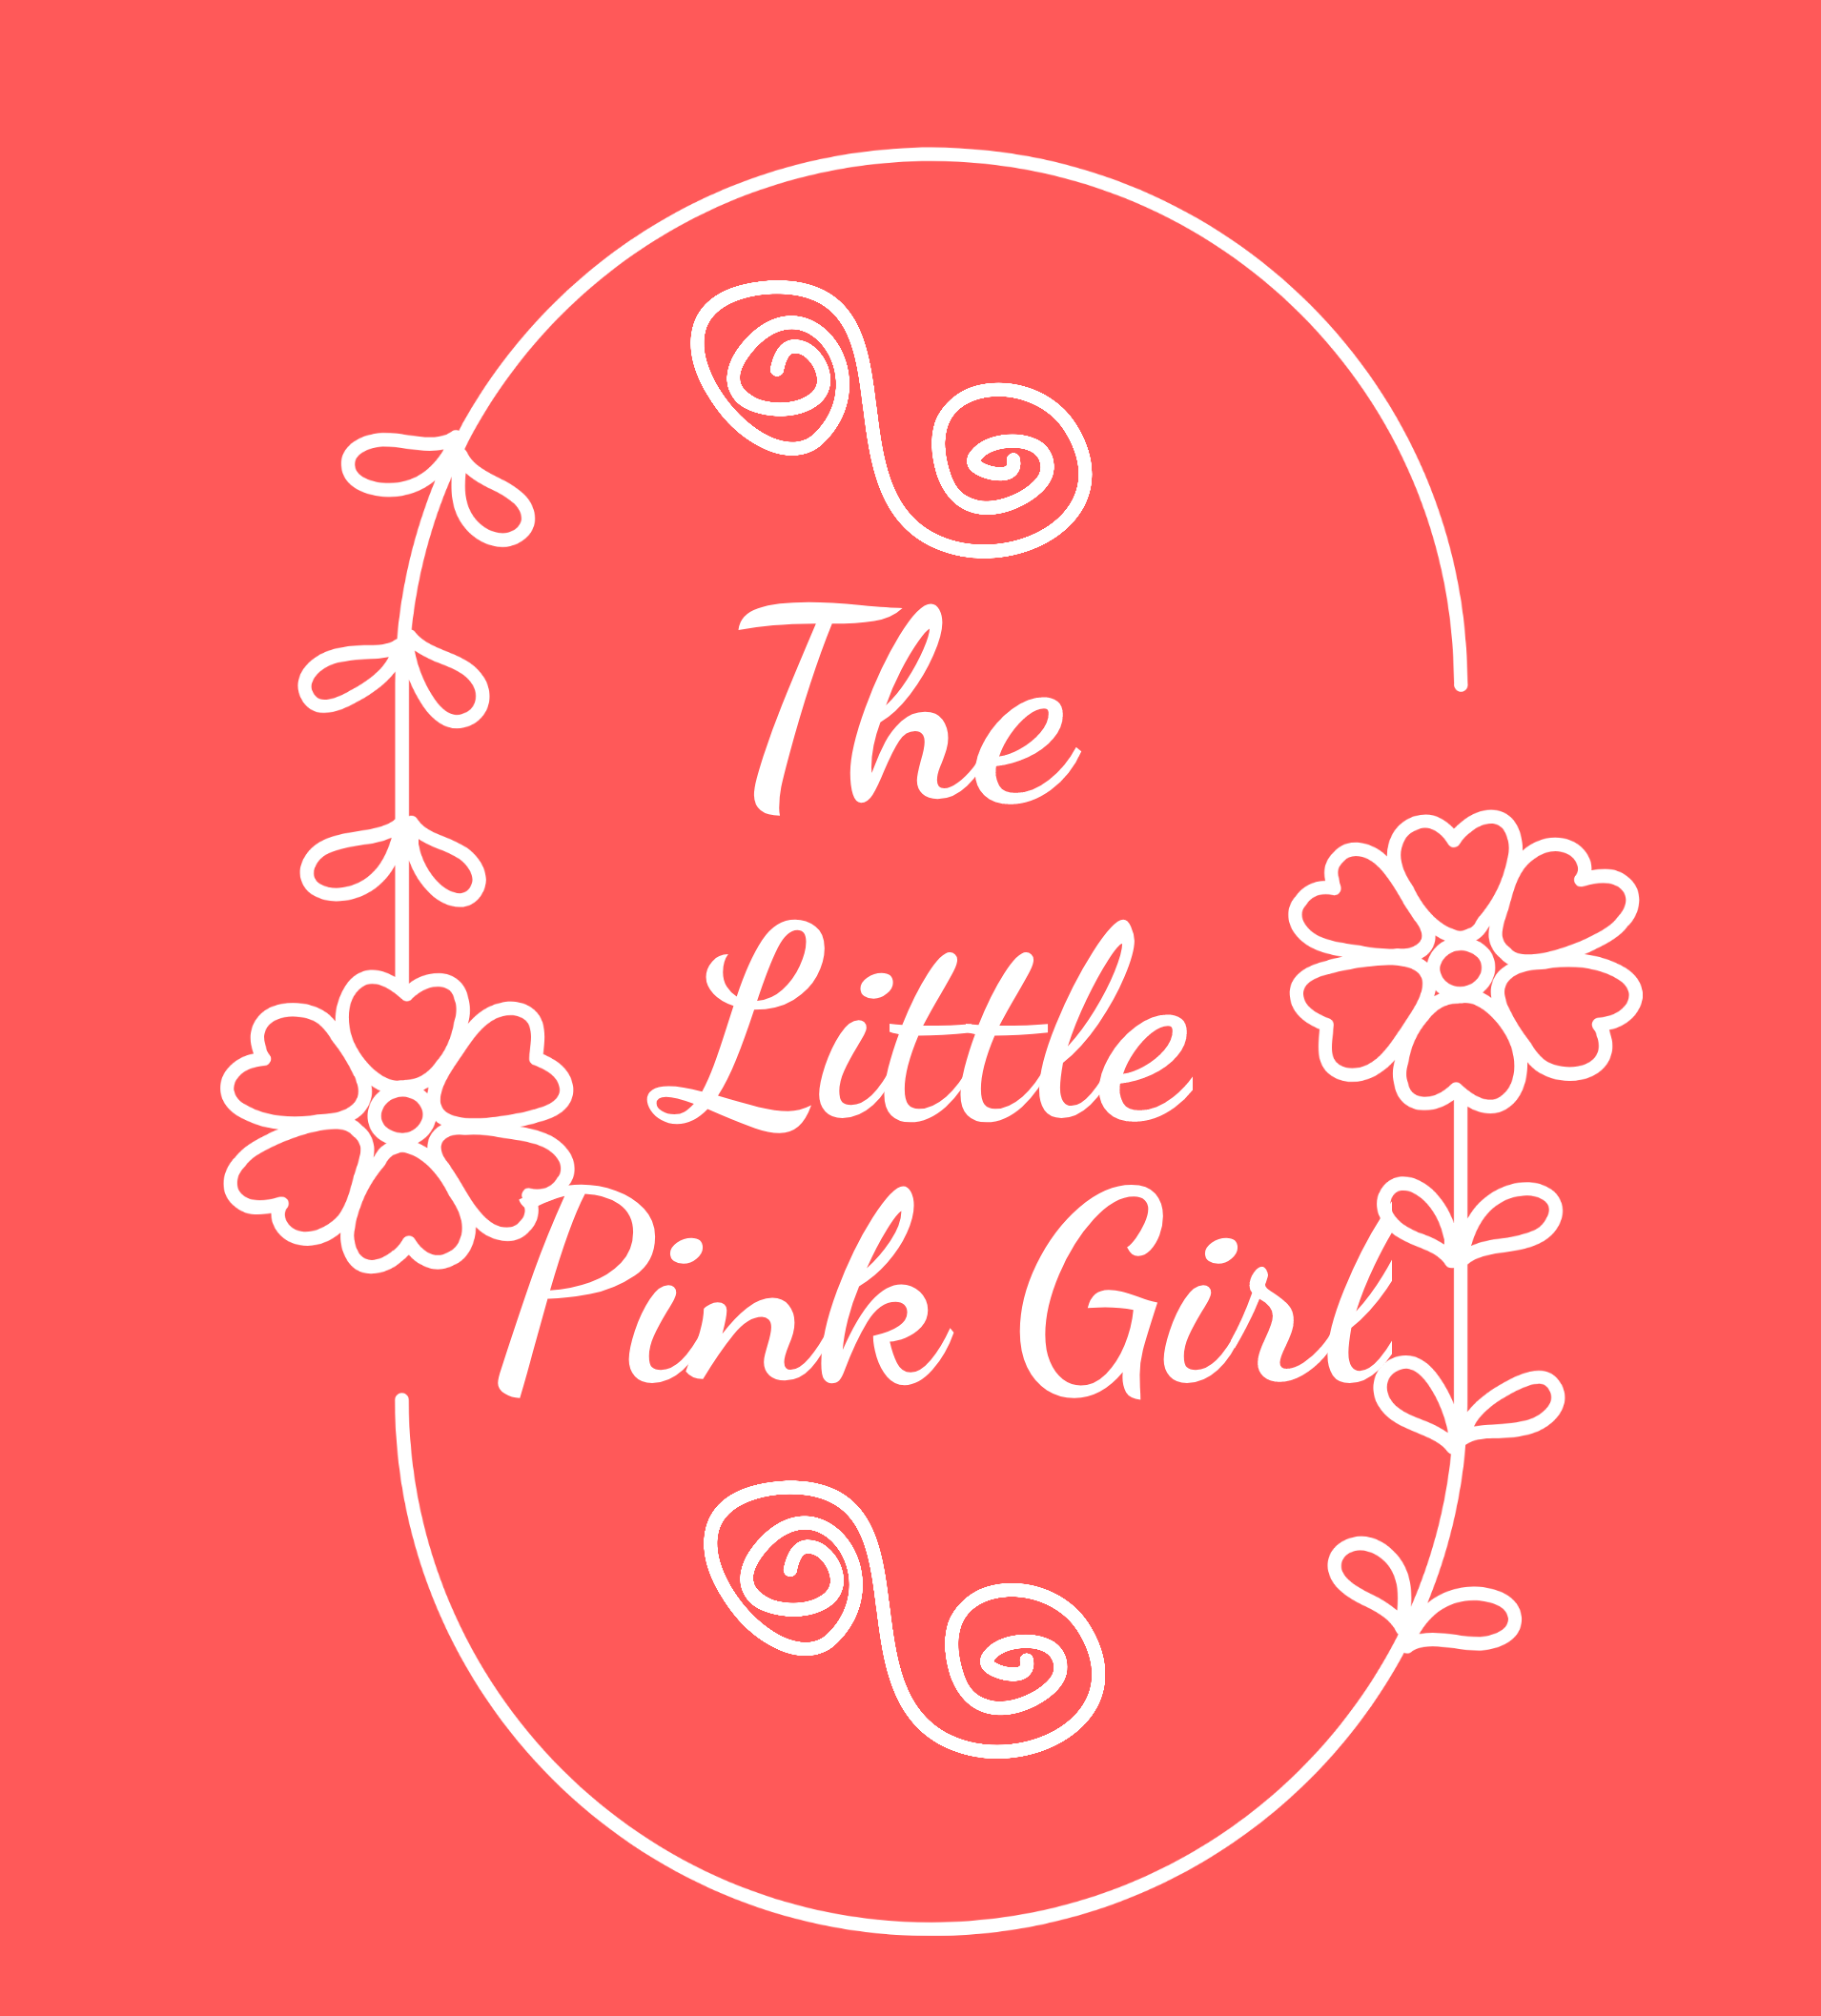 THE LITTLE PINK GIRL